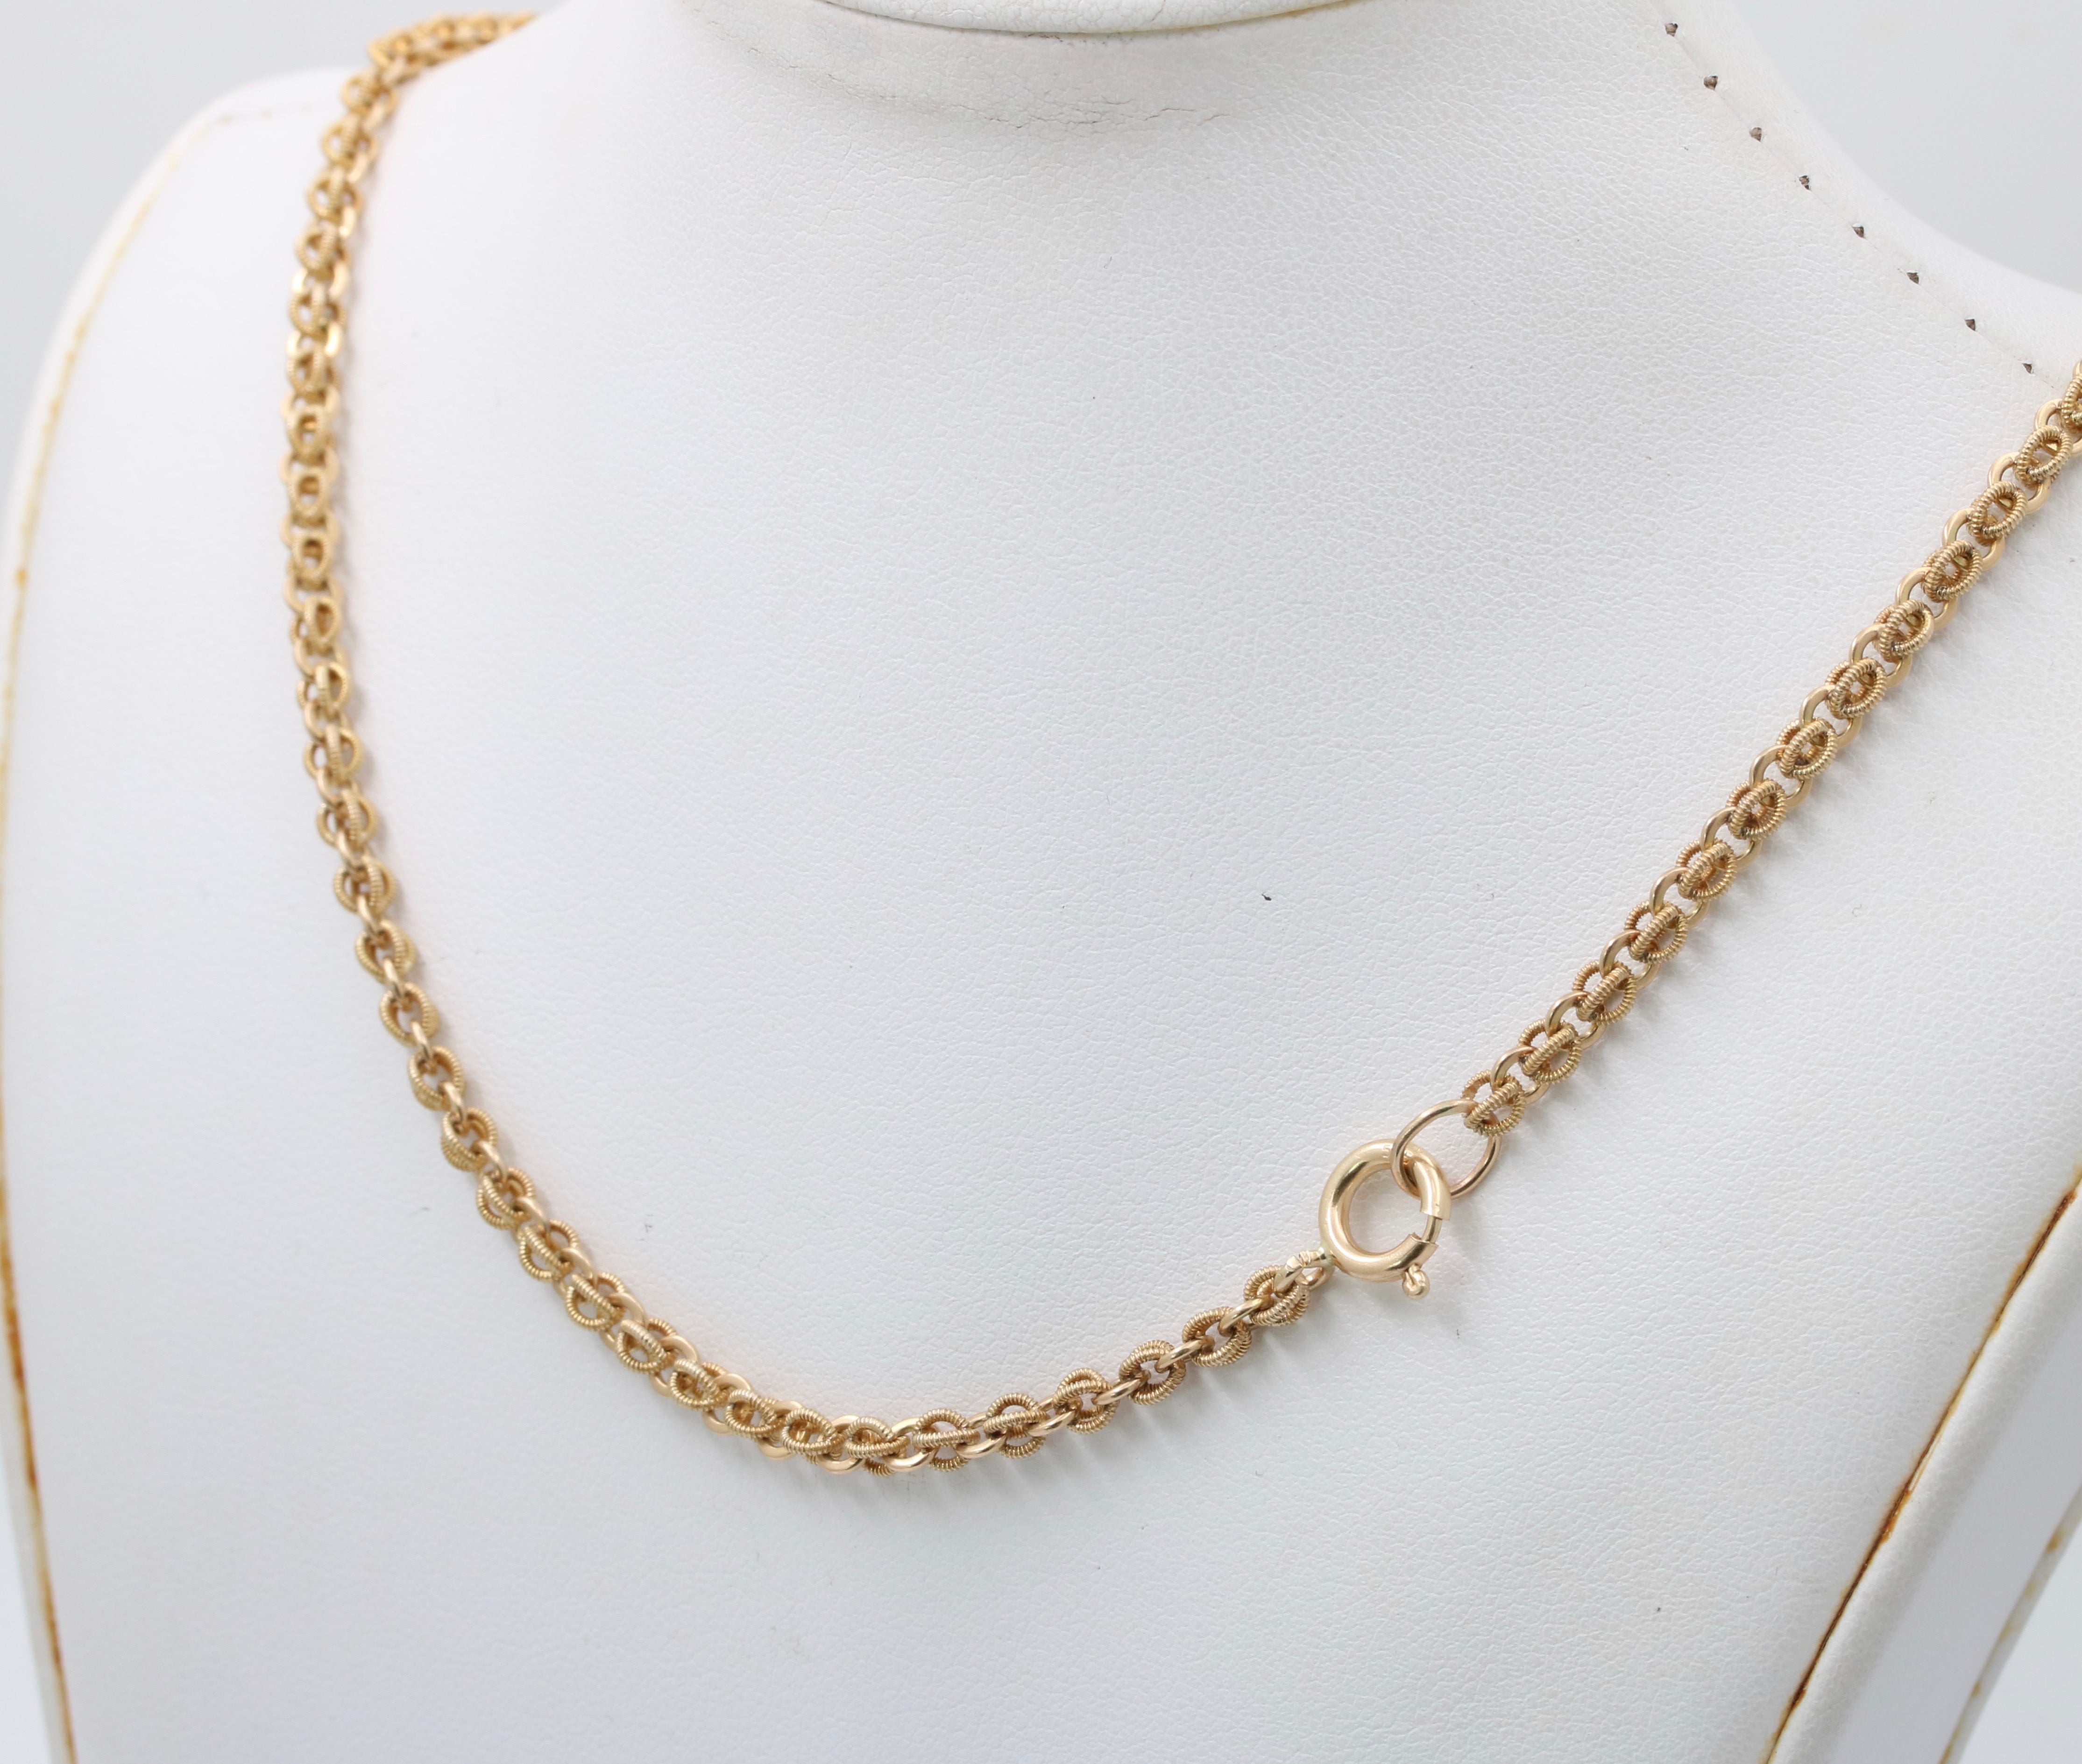 10KT YELLOW GOLD 2.75MM FLAT FIGARO CHAIN NECKLACE - 6 LENGTHS – GDS